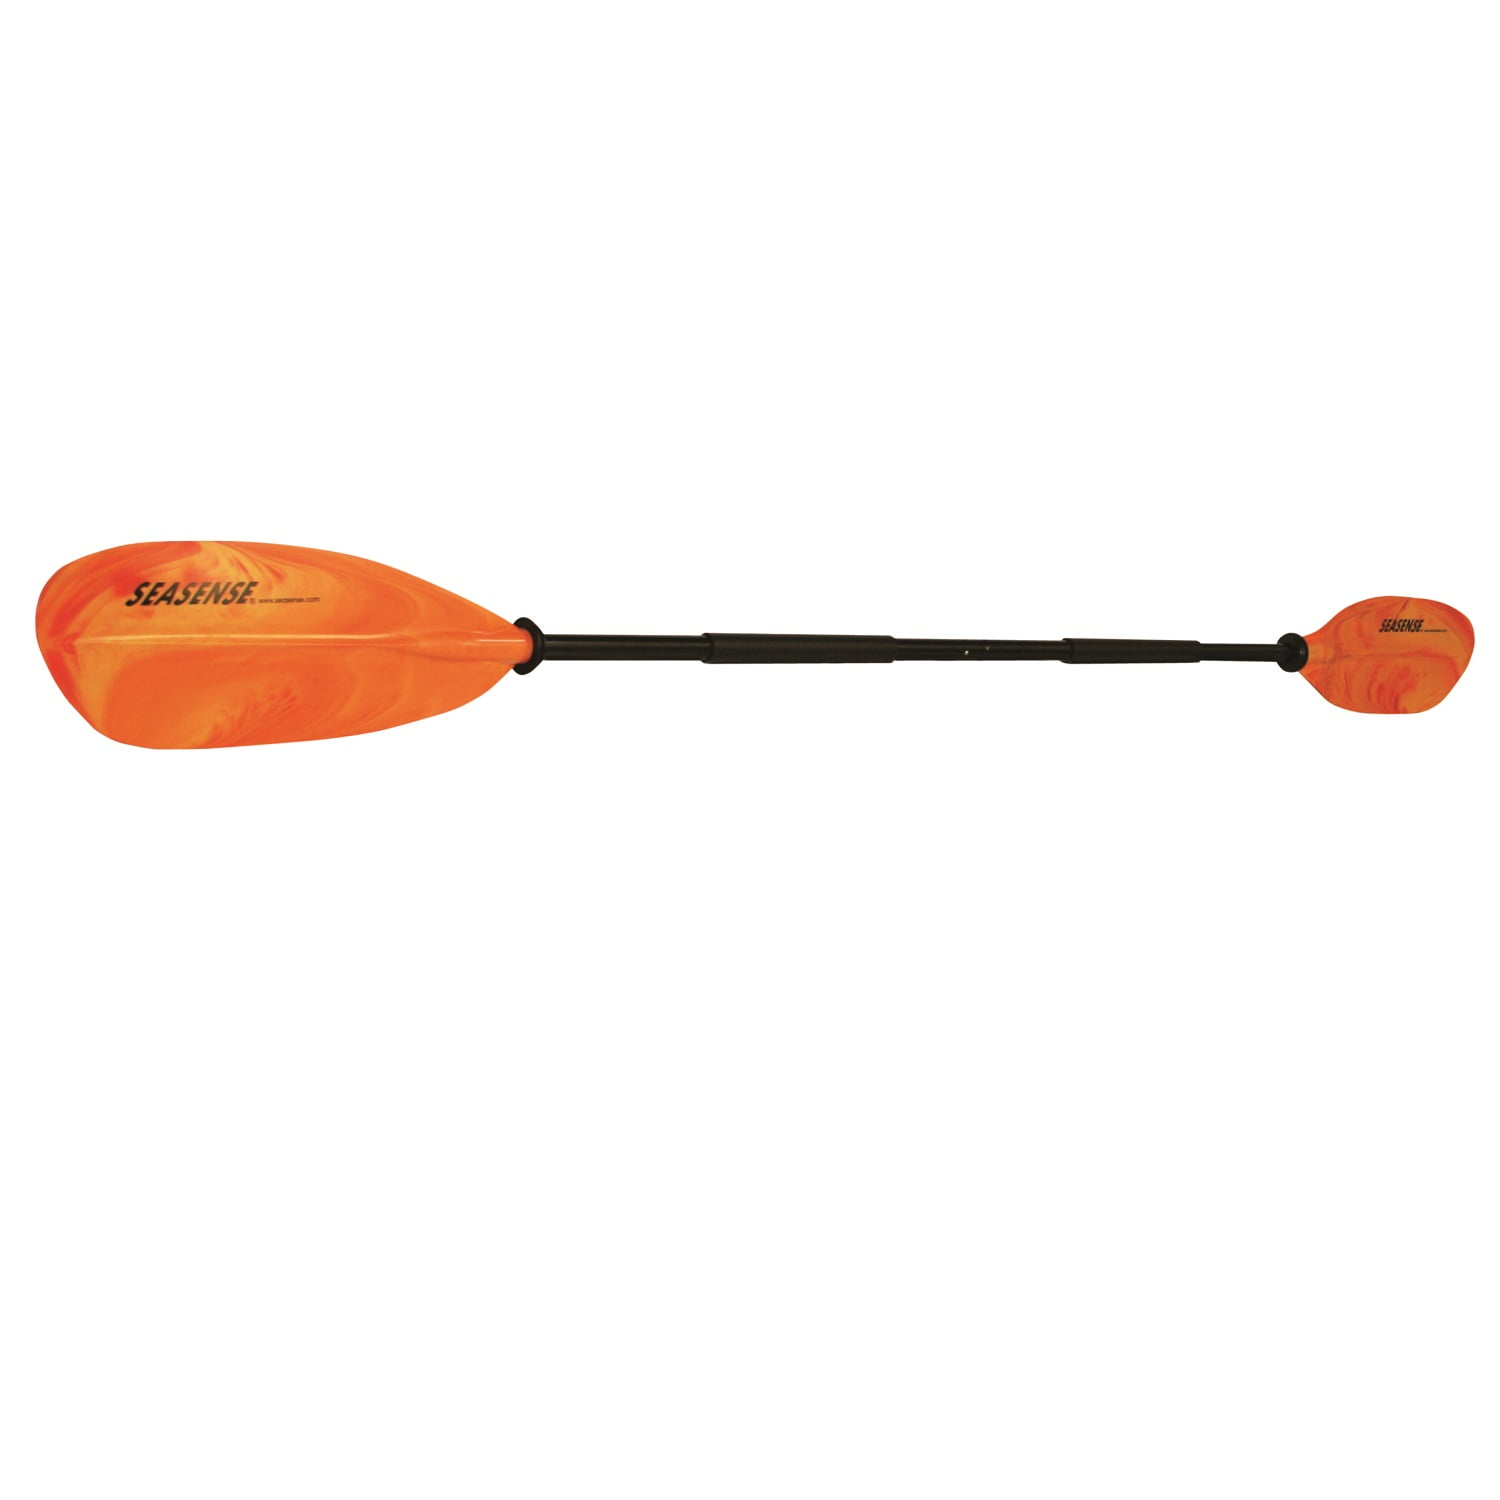 attwood 11768-2 Asymmetrical 2-Piece Heavy-Duty Kayak Paddle with Comfort Grips 